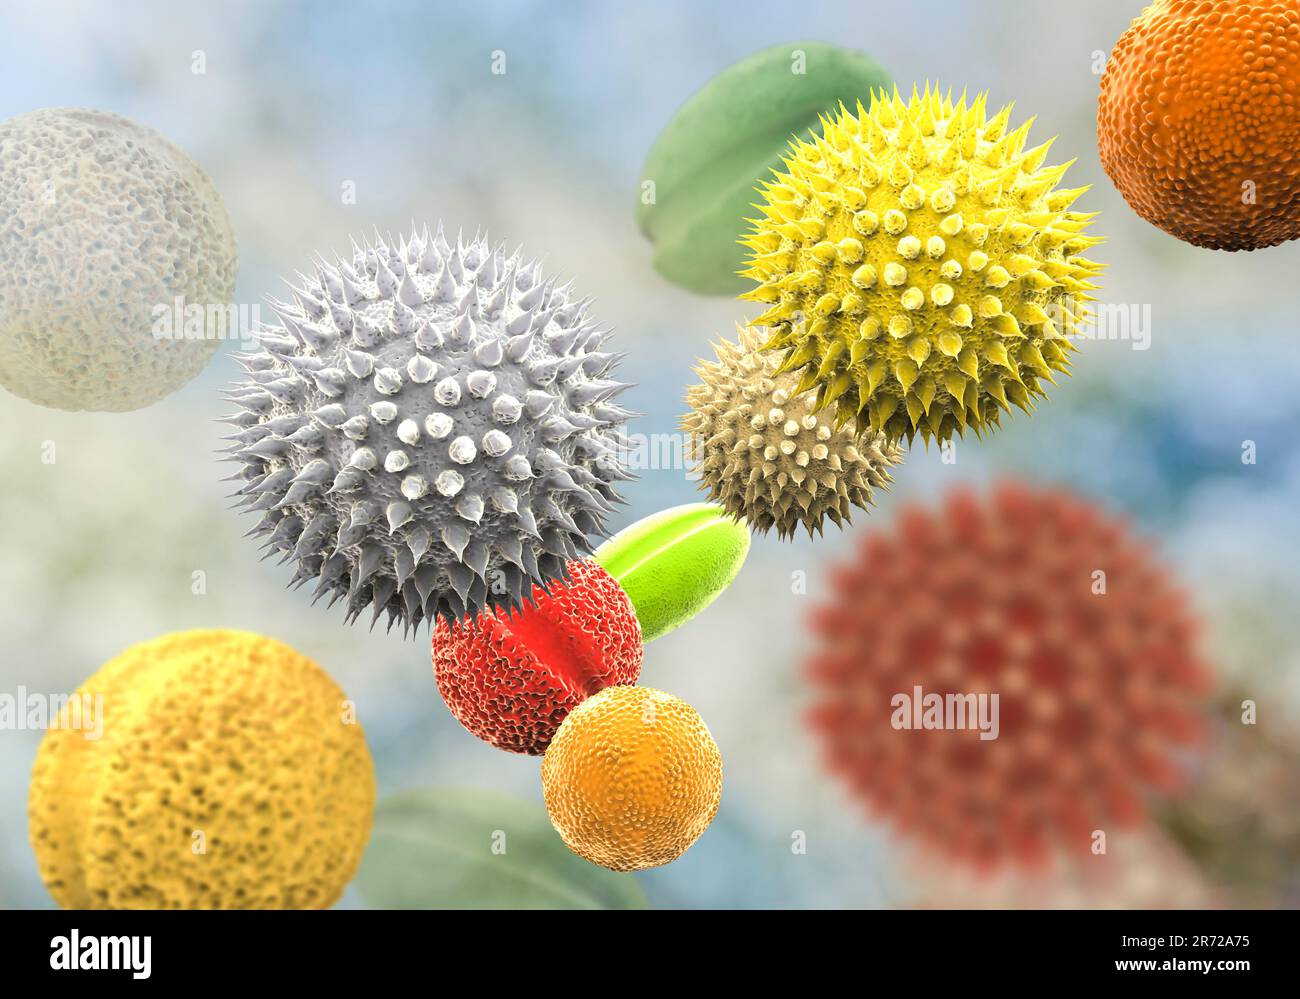 Pollen grains from different plants, conputer illustration. Pollen grain size, shape and surface texture differ from one plant species to another, as Stock Photo